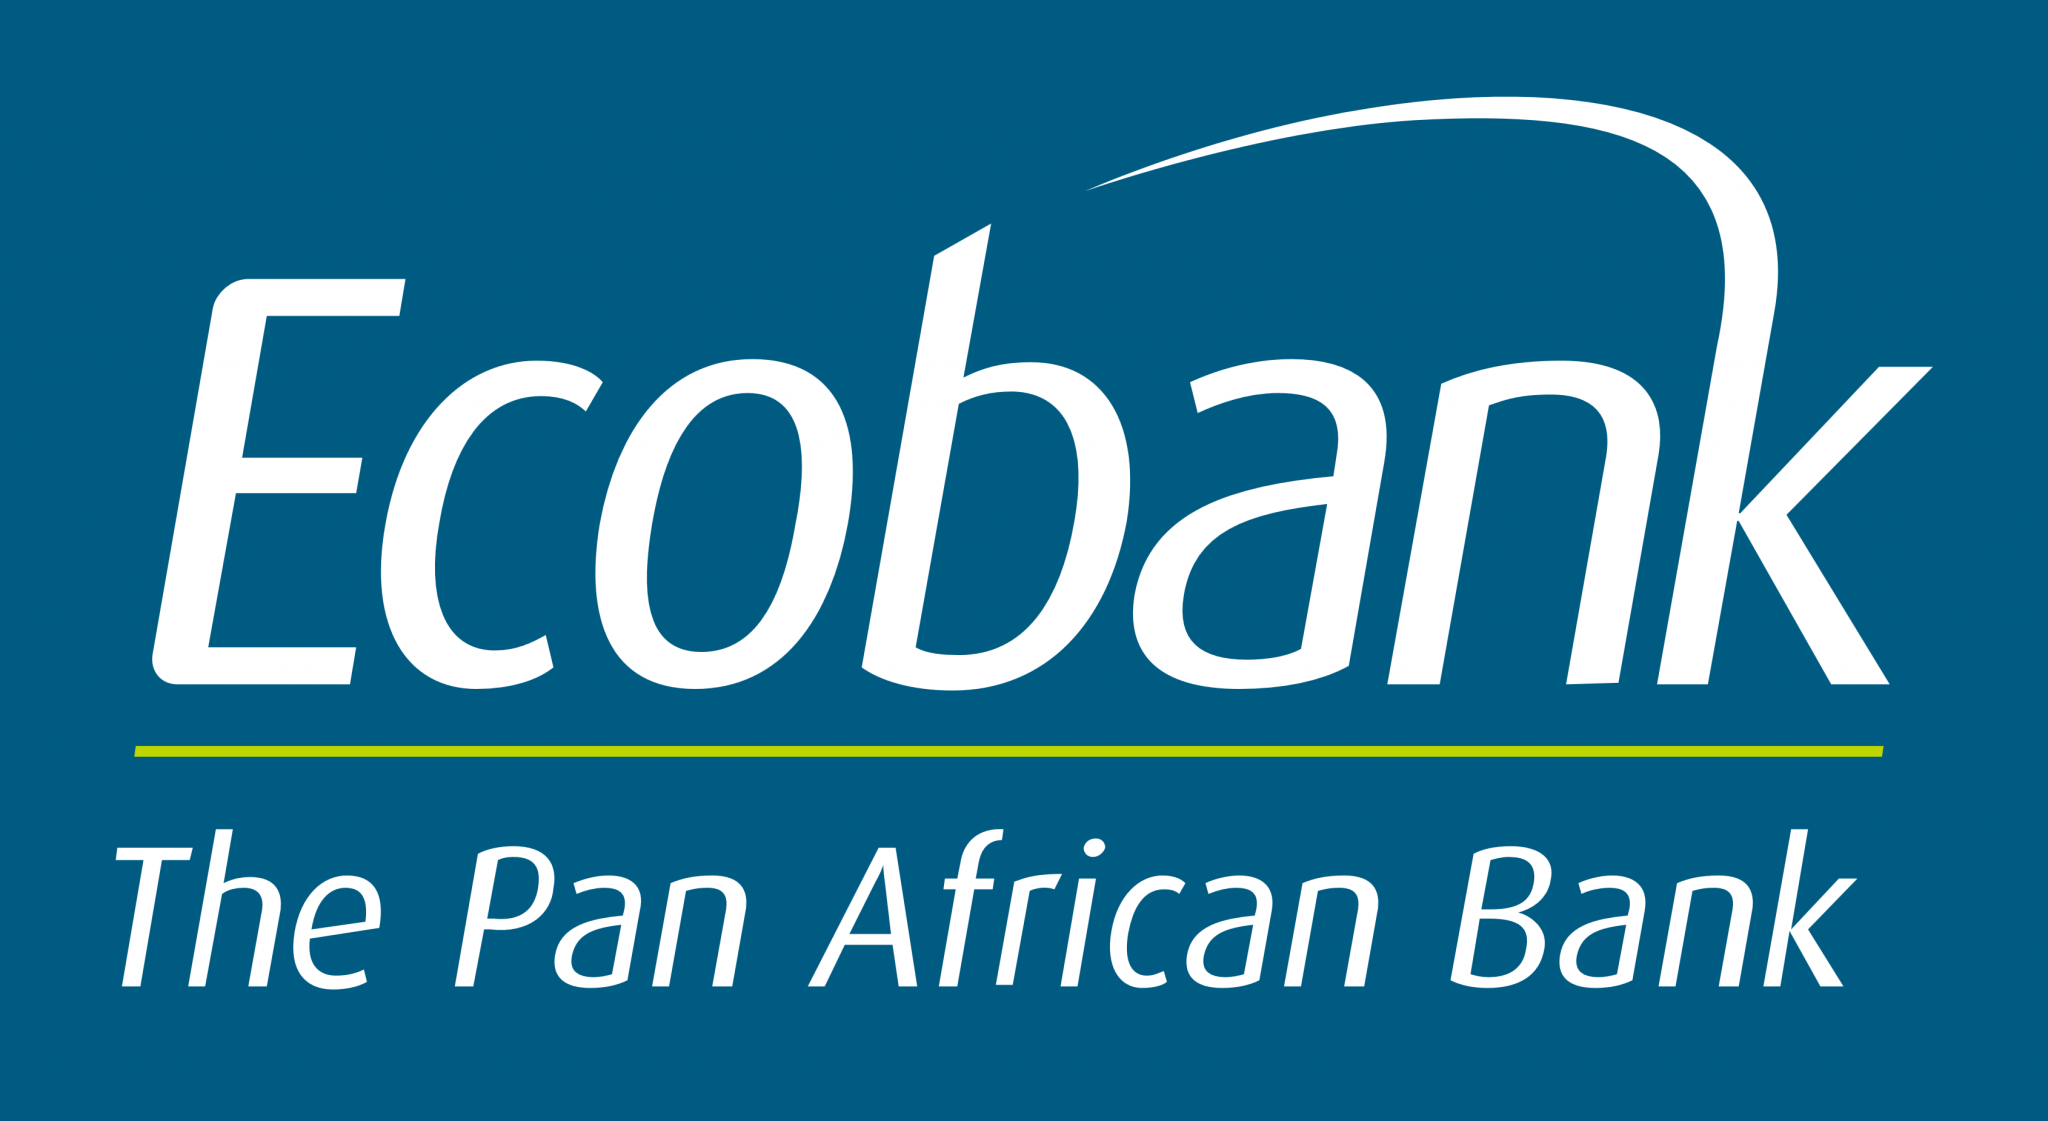 Ecobank Group wins Awards from EMEA Finance, The Banker and Global Finance